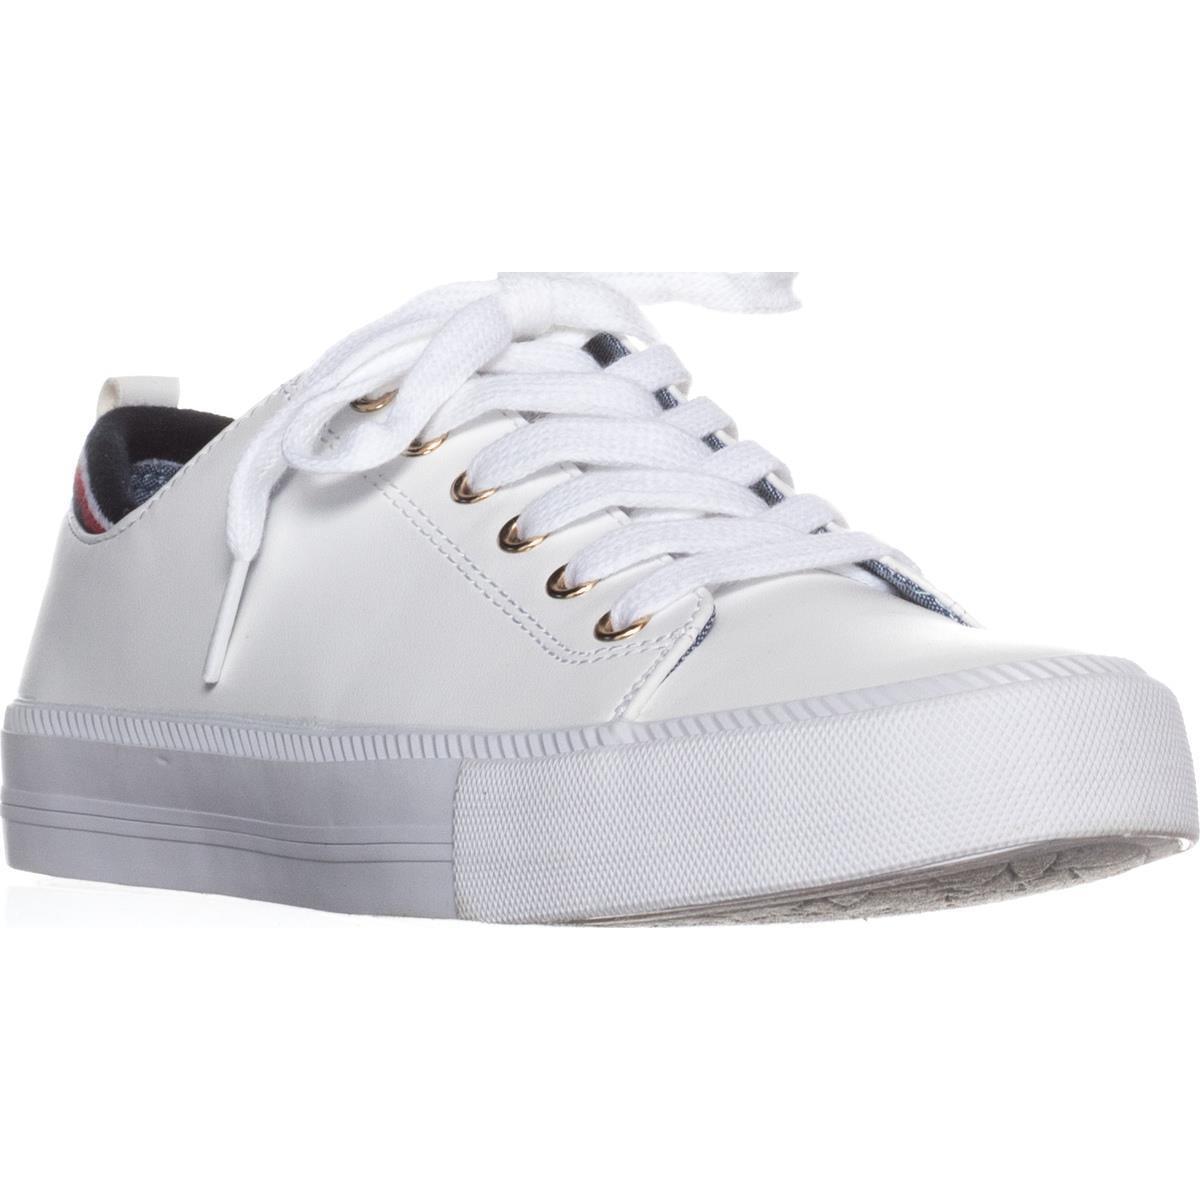 Tommy Hilfiger Womens Two Low Top Lace Up Fashion Sneakers, White, Size 7.5